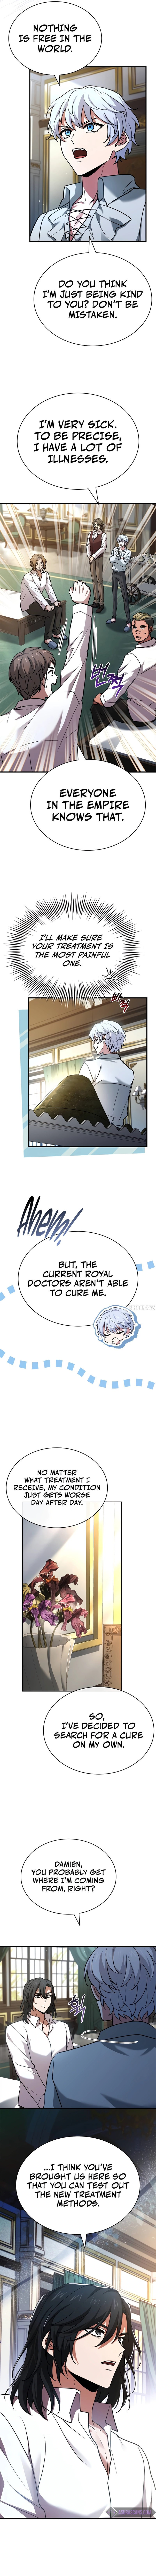 the-crown-prince-that-sells-medicine-chap-13-8